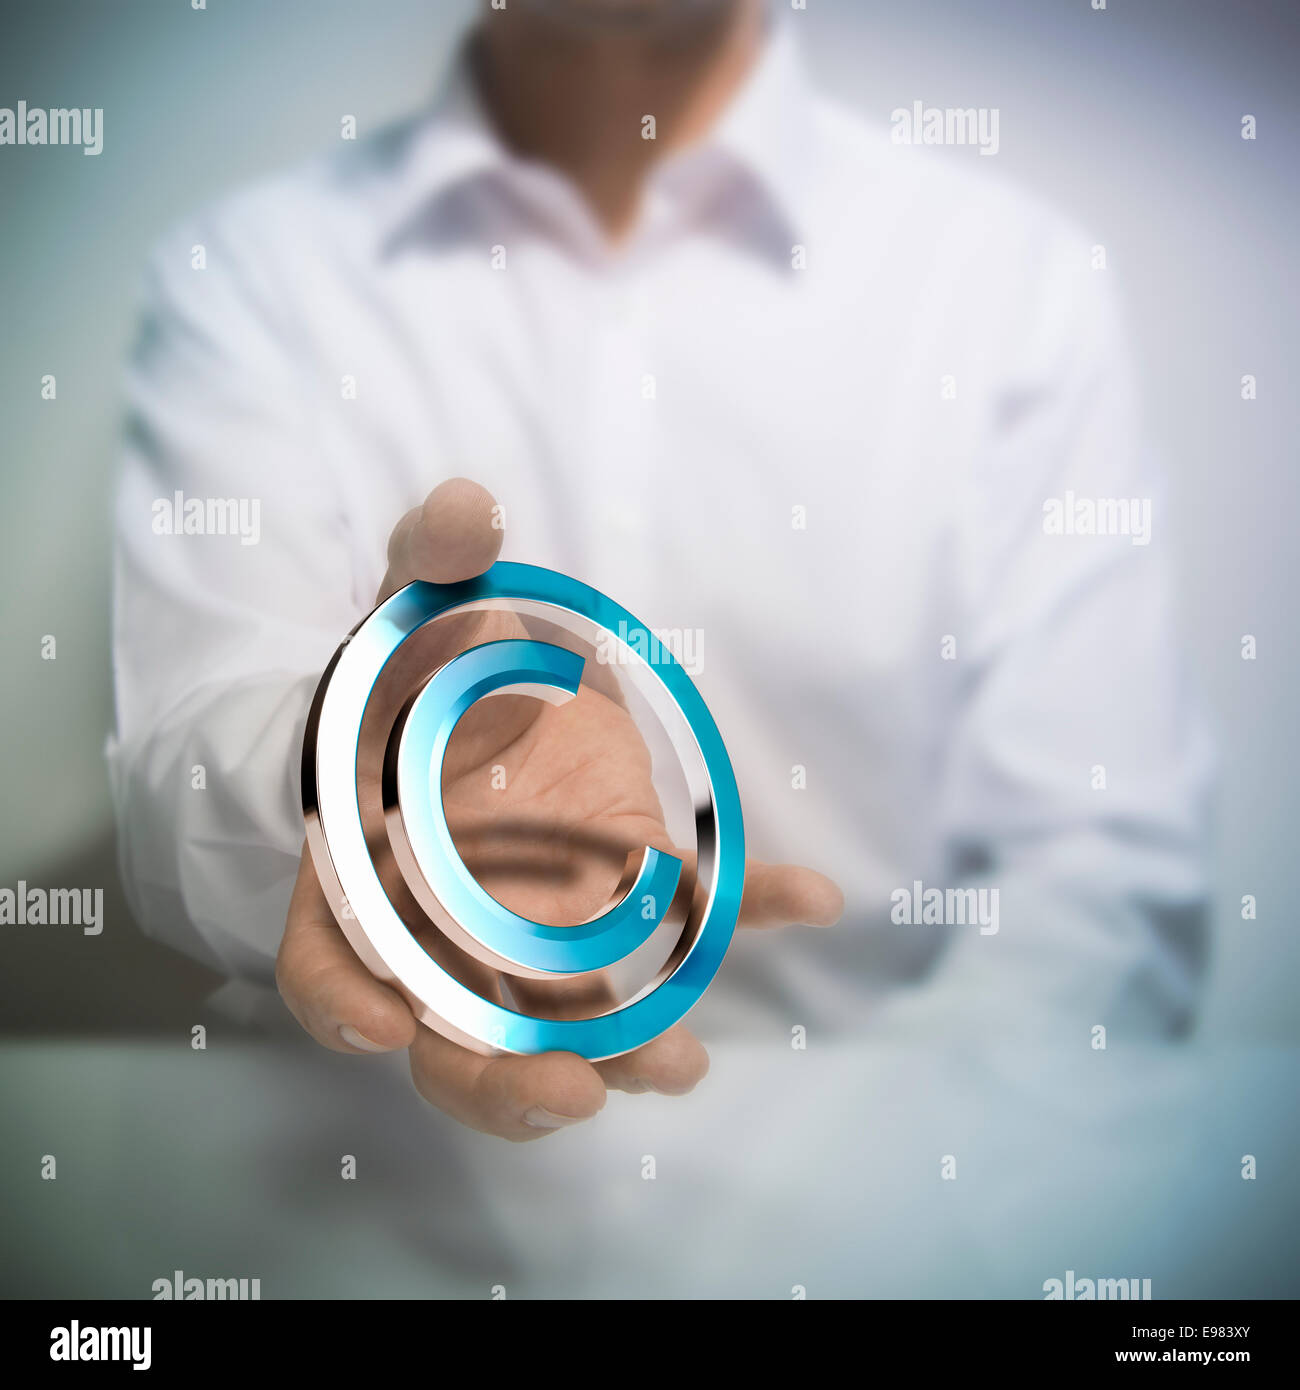 Man holding metallic copyright symbol. Concept image for illustration of author protection or intellectual property Stock Photo